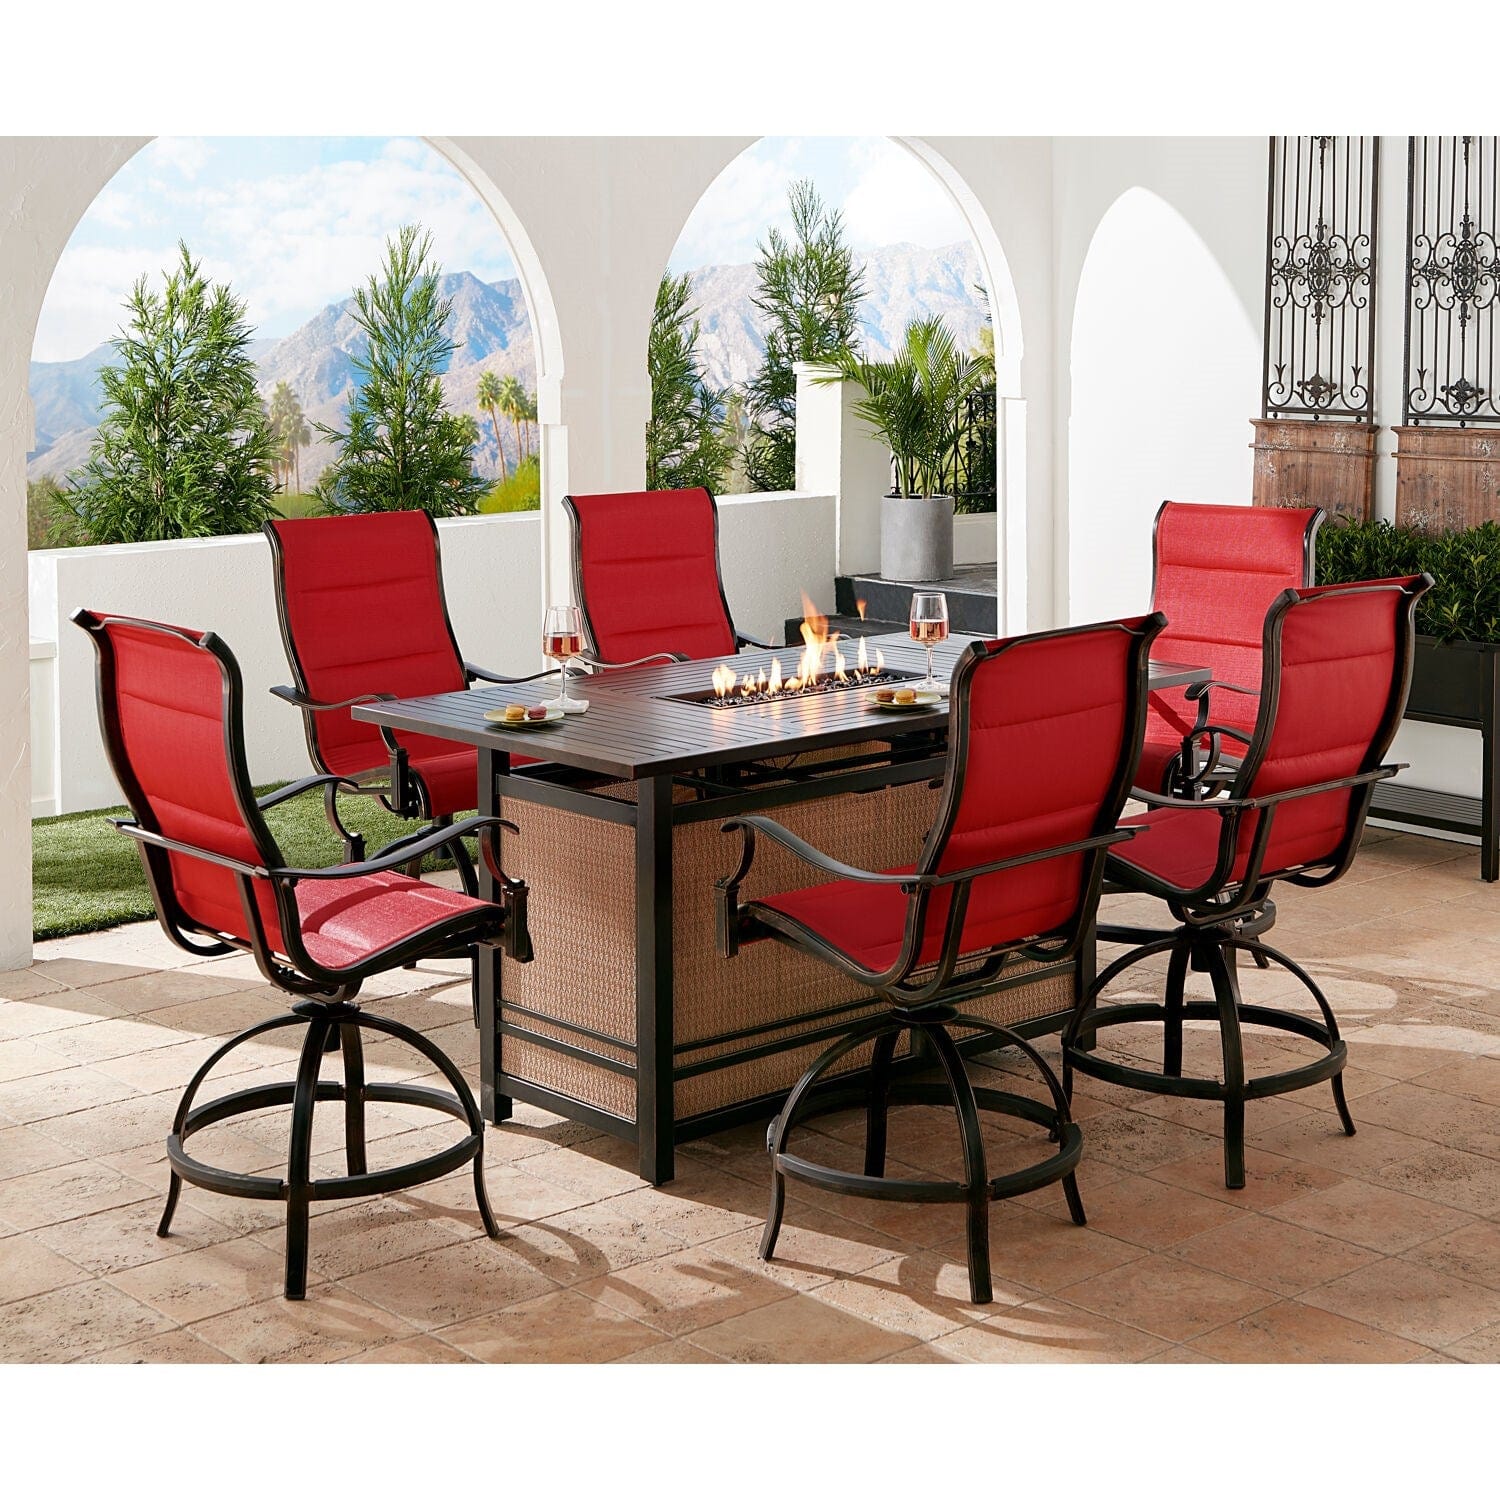 Hanover Fire Pit Dining Set Hanover - Traditions 7-Piece Aluminum Frame High-Dining Set in Red with 6 Padded Counter-Height Swivel Chairs and a 30,000 BTU Fire Pit Dining Table | TRAD7PCPFPDBR-RED